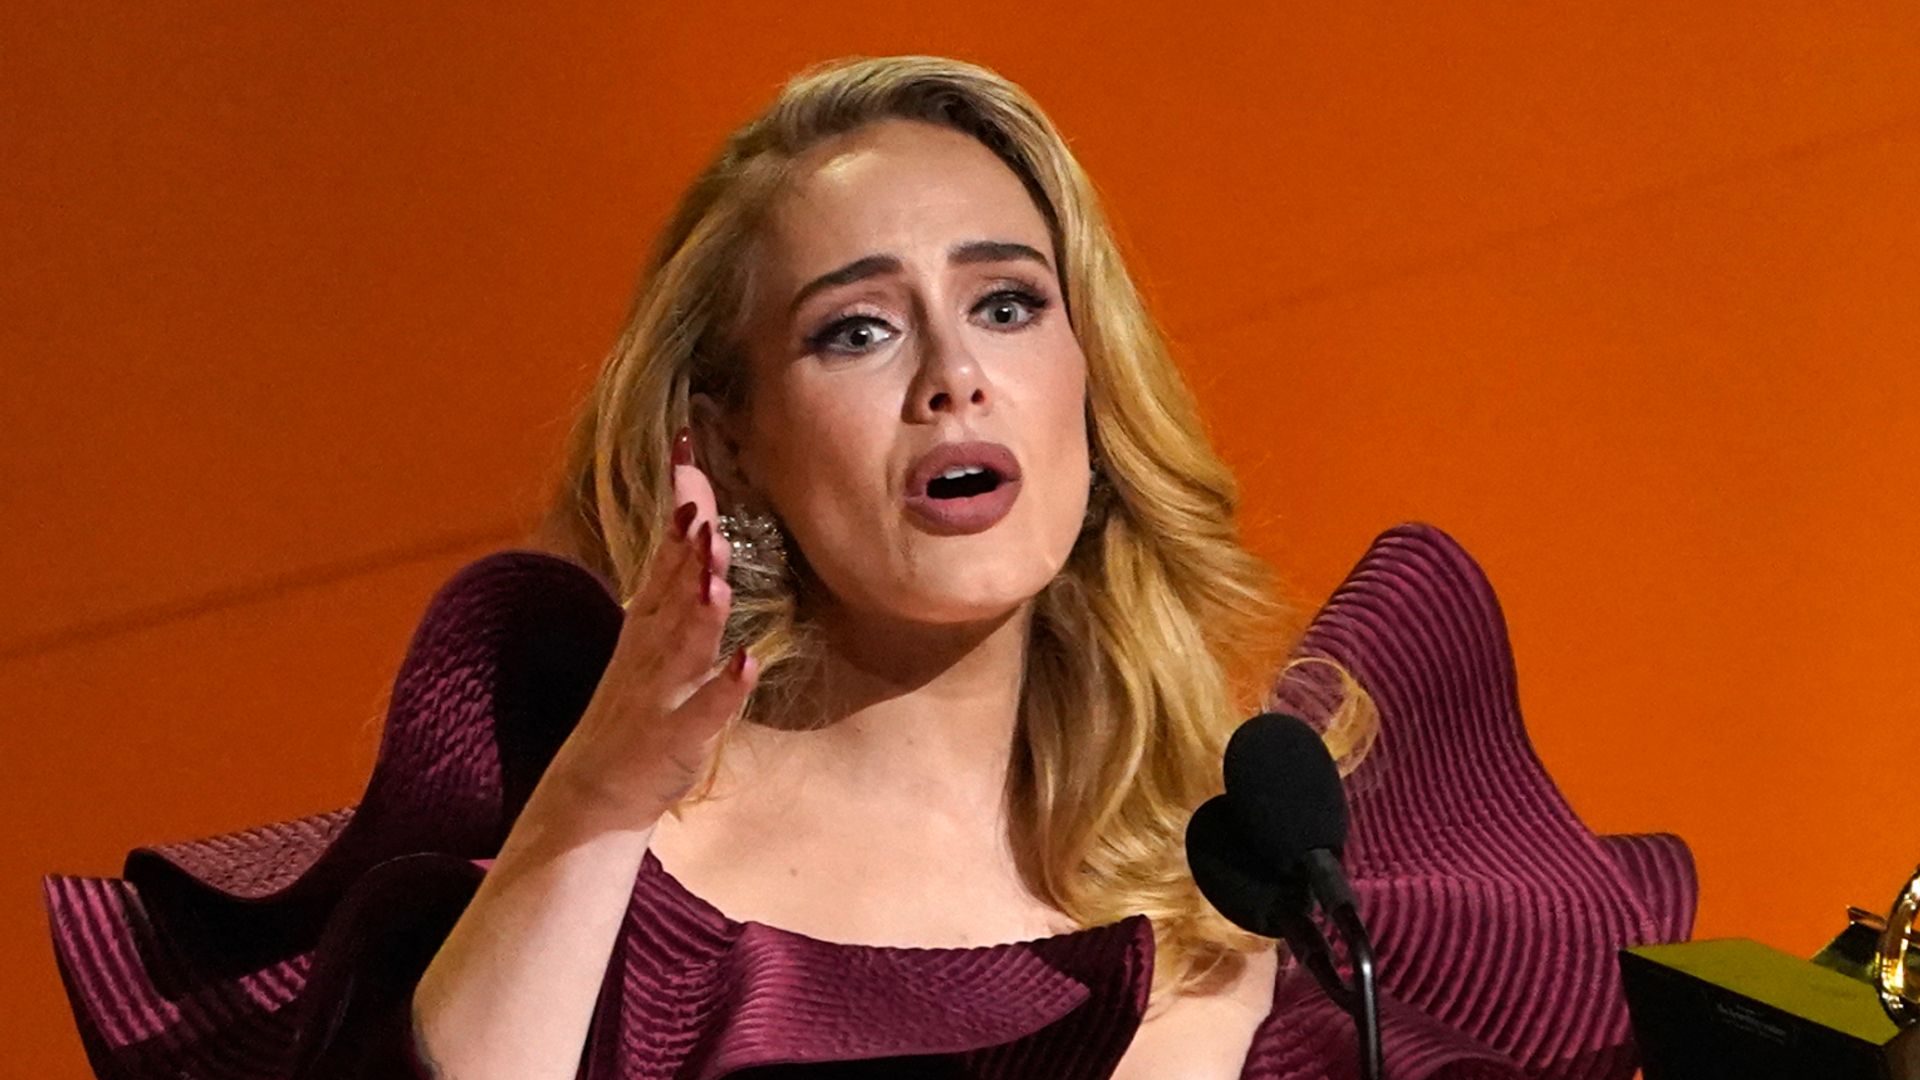 'My tank is quite empty': Adele planning 'big break' from music